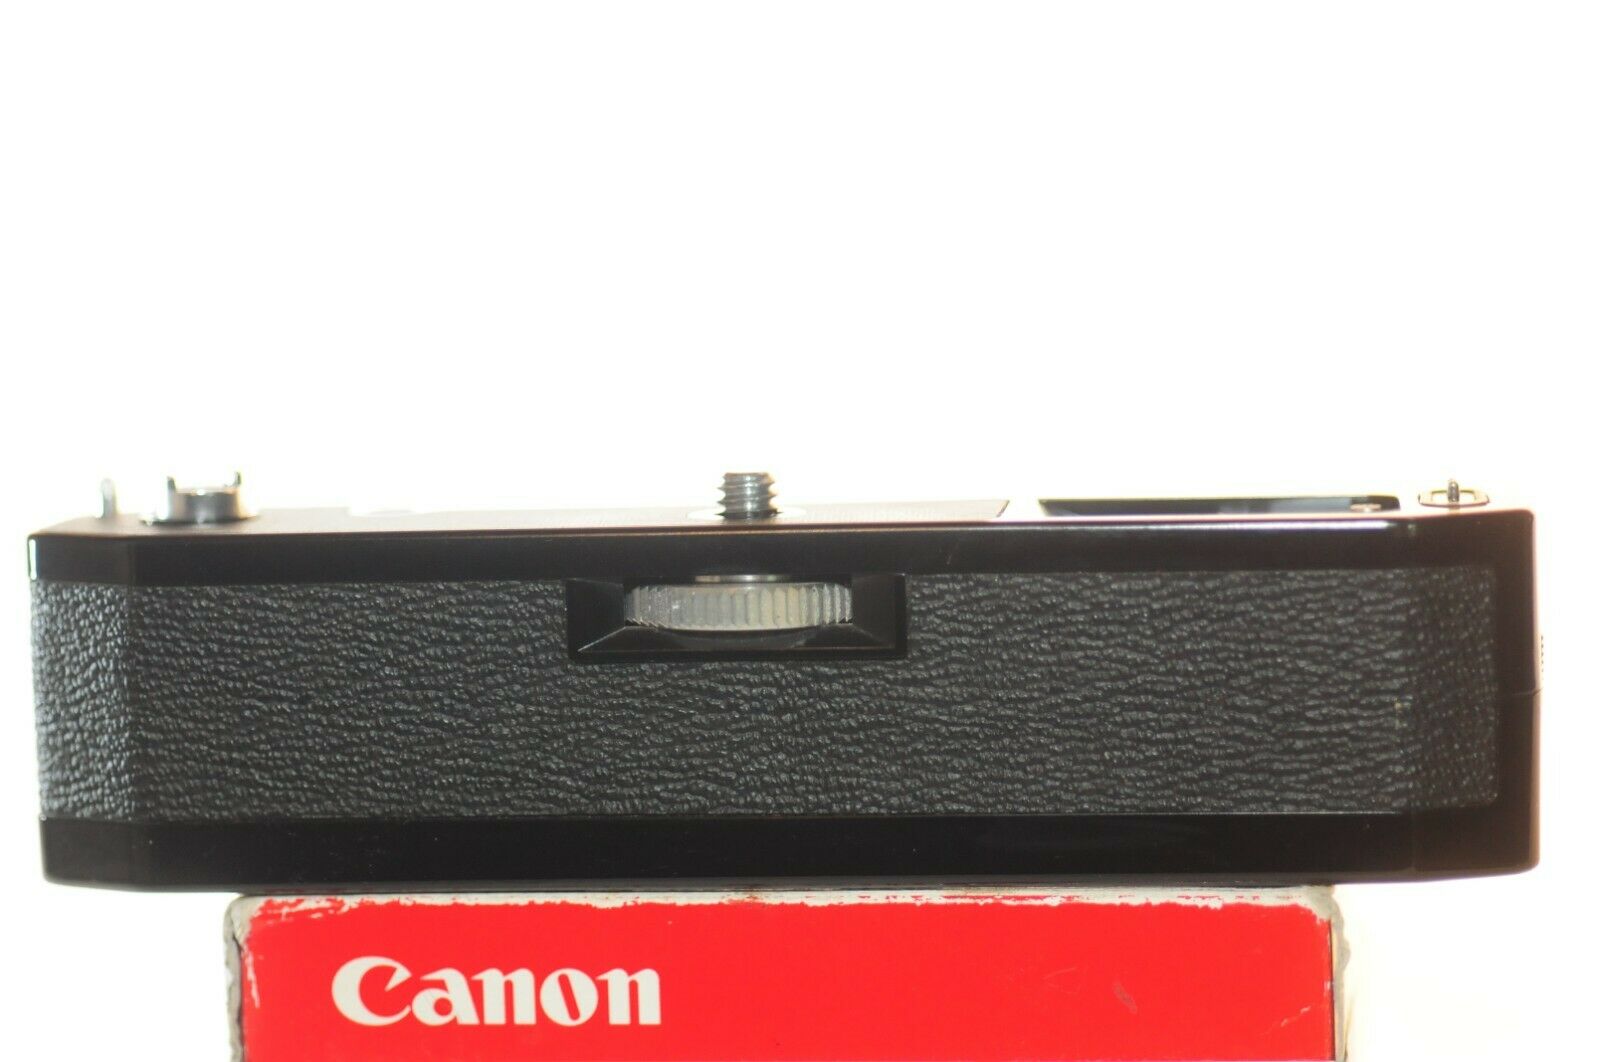 Canon Power Winder A Working Nice For A1 Ae-1 Program At-1 35mm Slr Film Camera